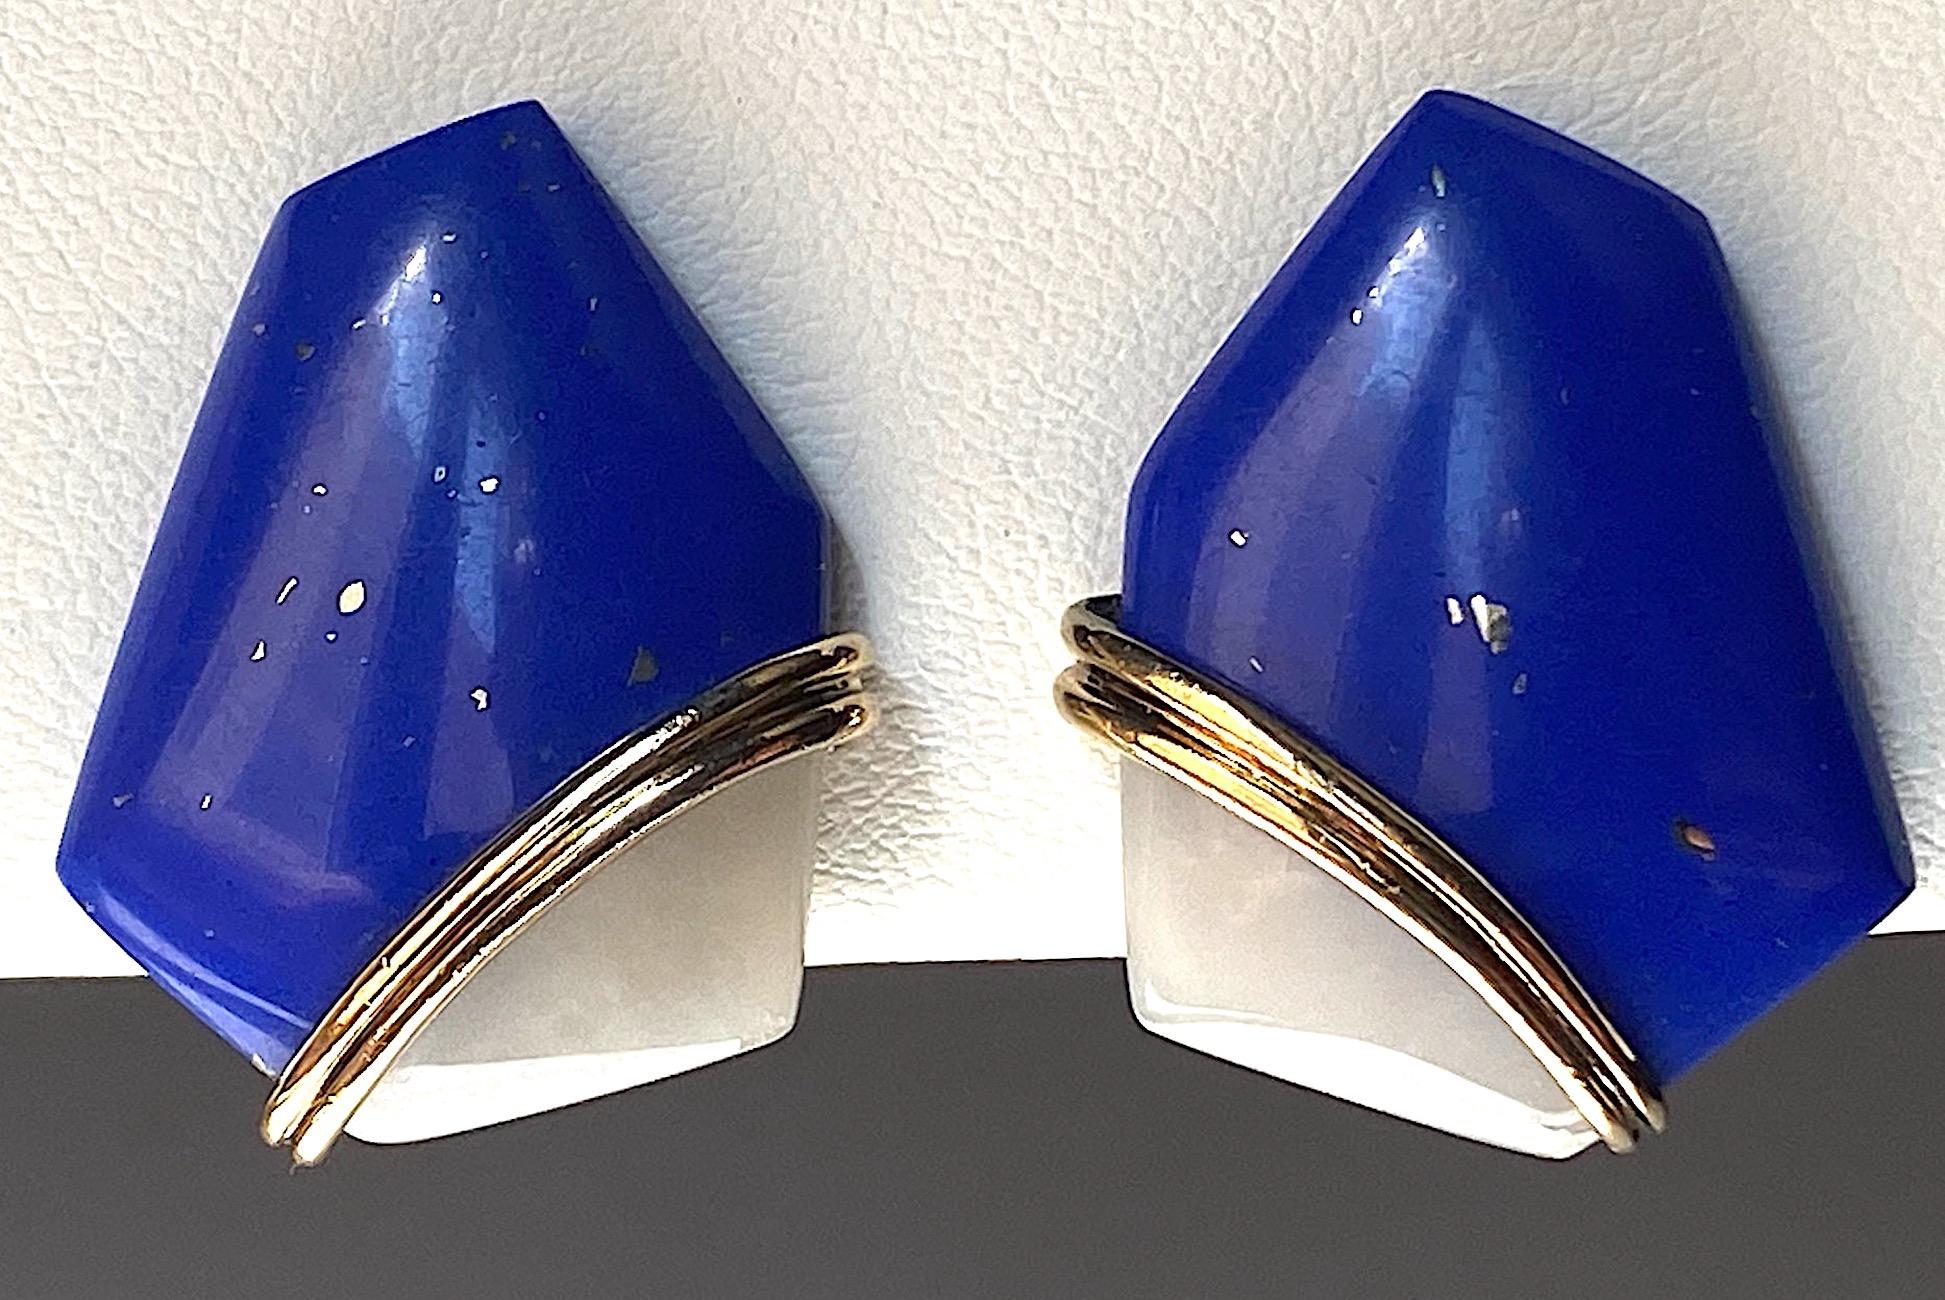 An elegant and modern design abstract pair of earrings by Kai-Yin Lo. Each is comprised of an asymmetric shape polished natural blue lapis lazuli stone accented by a wedge of opaque white quartz. The setting is gold on .925 sterling silver know as